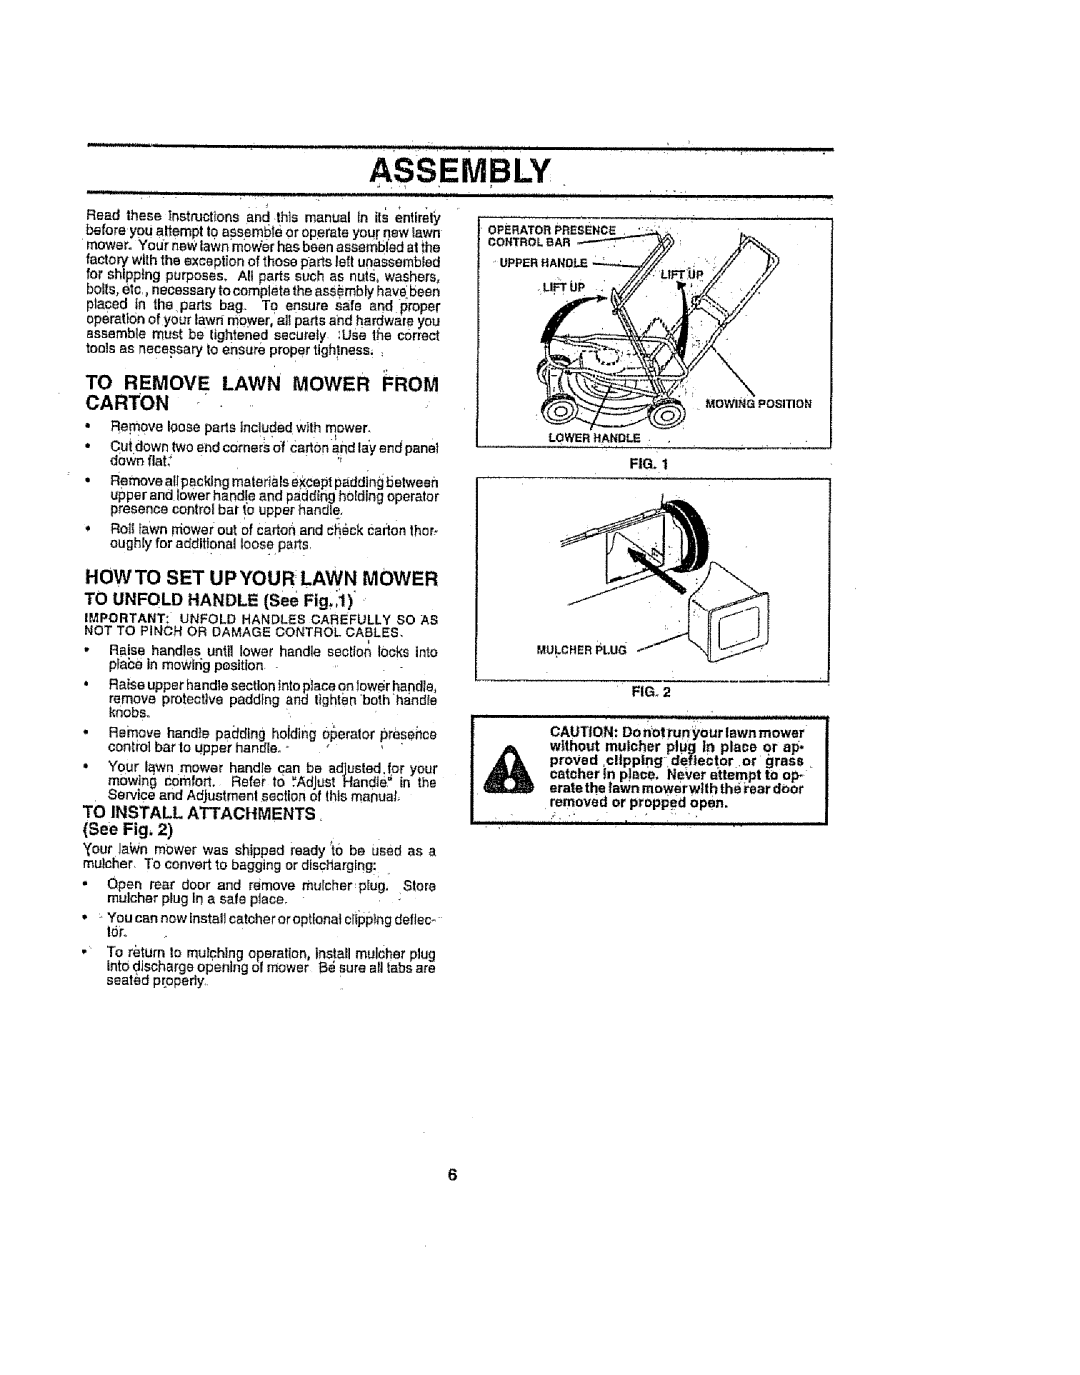 Sears 917386121 owner manual Assembly, Carton, Li Up, To Remove Lawn Mower From, Howto Set Upyour Lawn Mower 